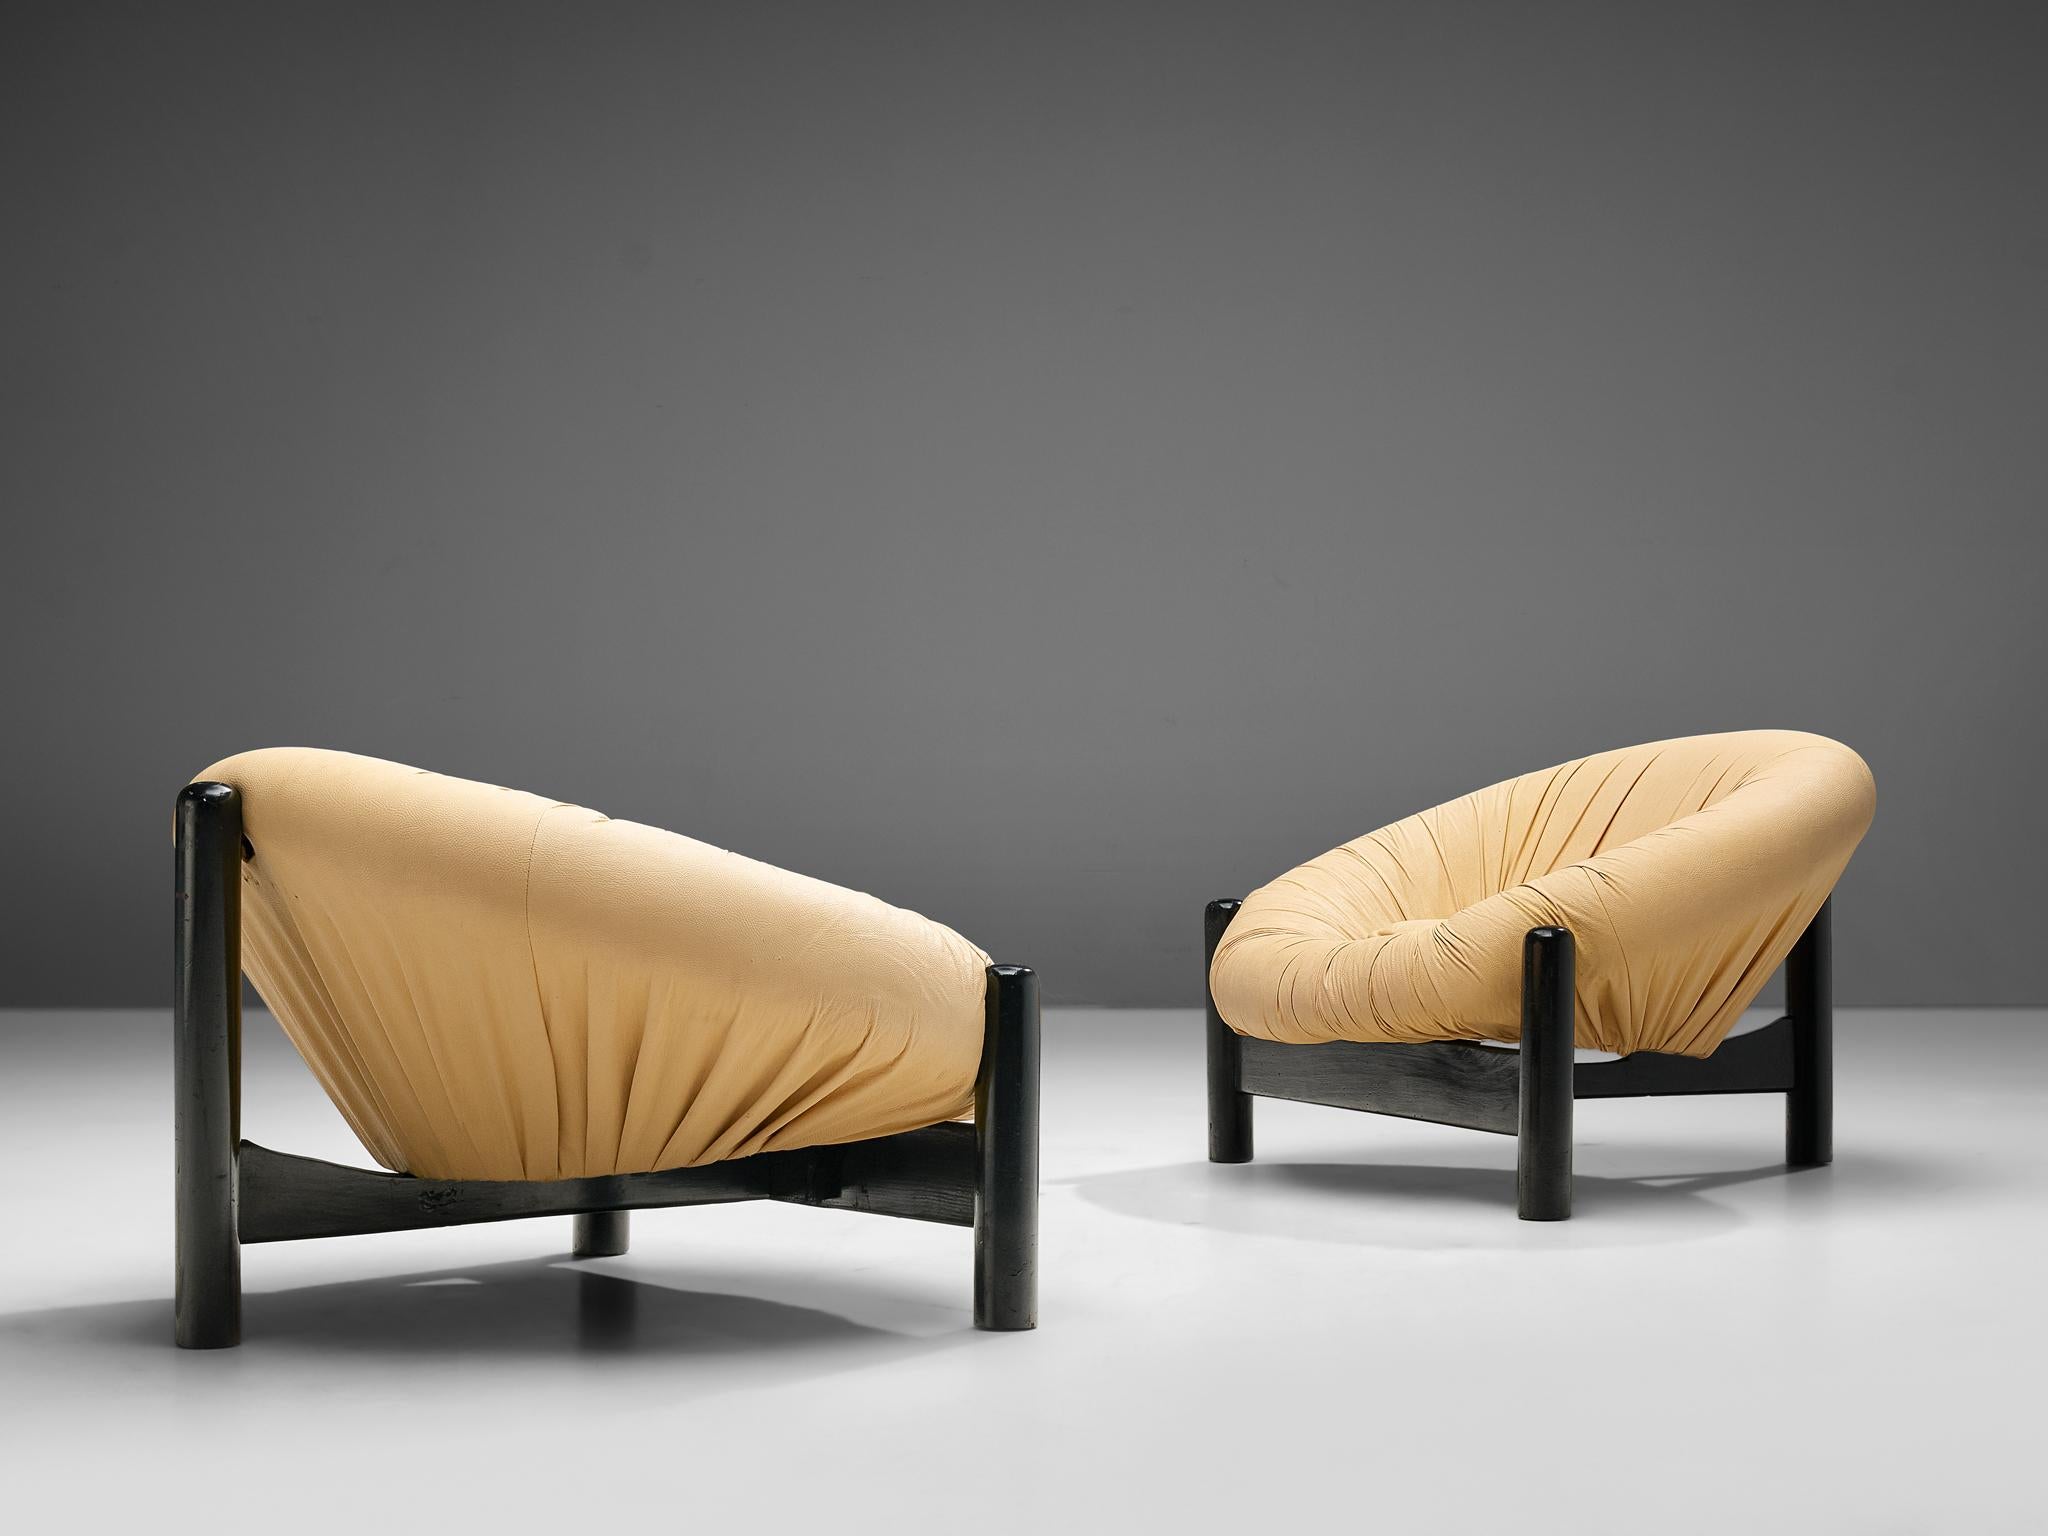 Set of round lounge chairs, lacquered wood and fabric, Brazil, 1970s.

A pair of bulky Brazilian lounge chairs. The chairs consists of a shell and seat made out of one piece, covered with light yellow fabric upholstery. The nest seat rests on a